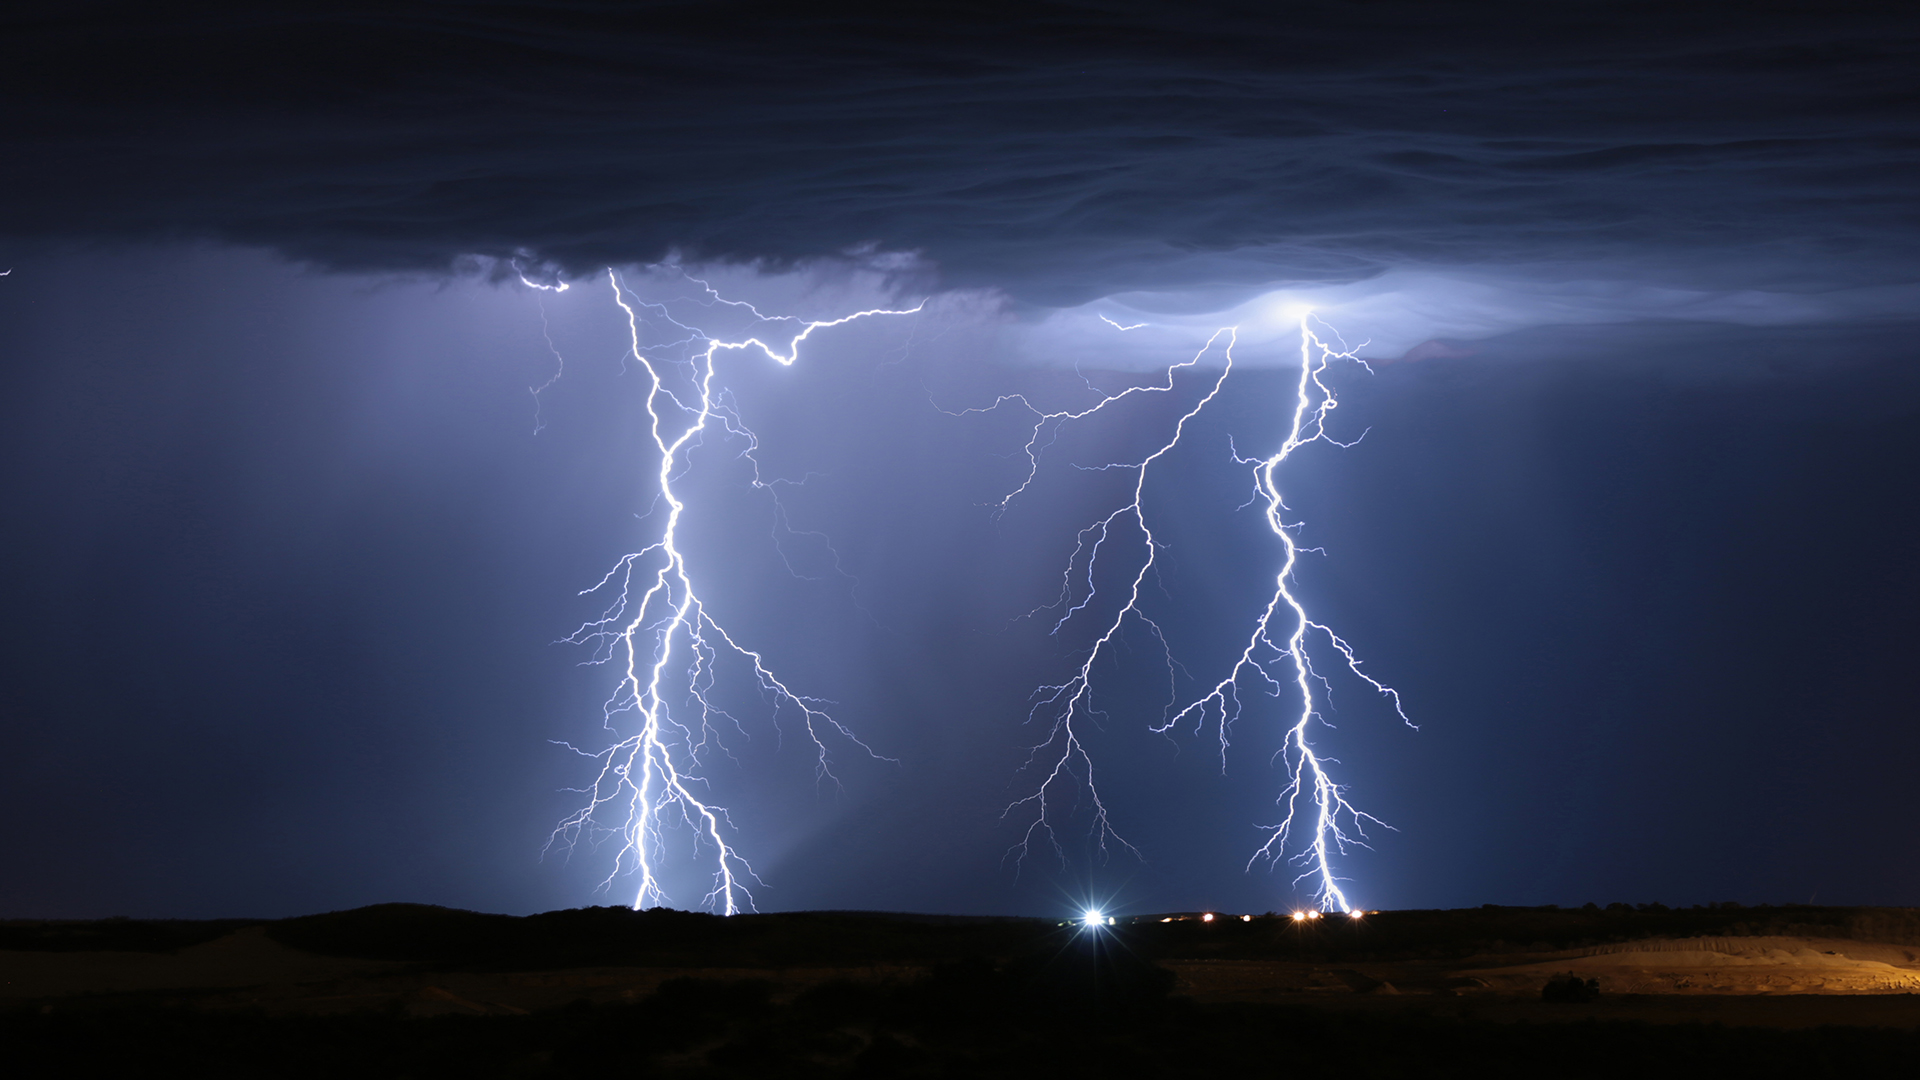 Superbolts' are real, and flash up to 1,000 times than regular lightning | Live Science